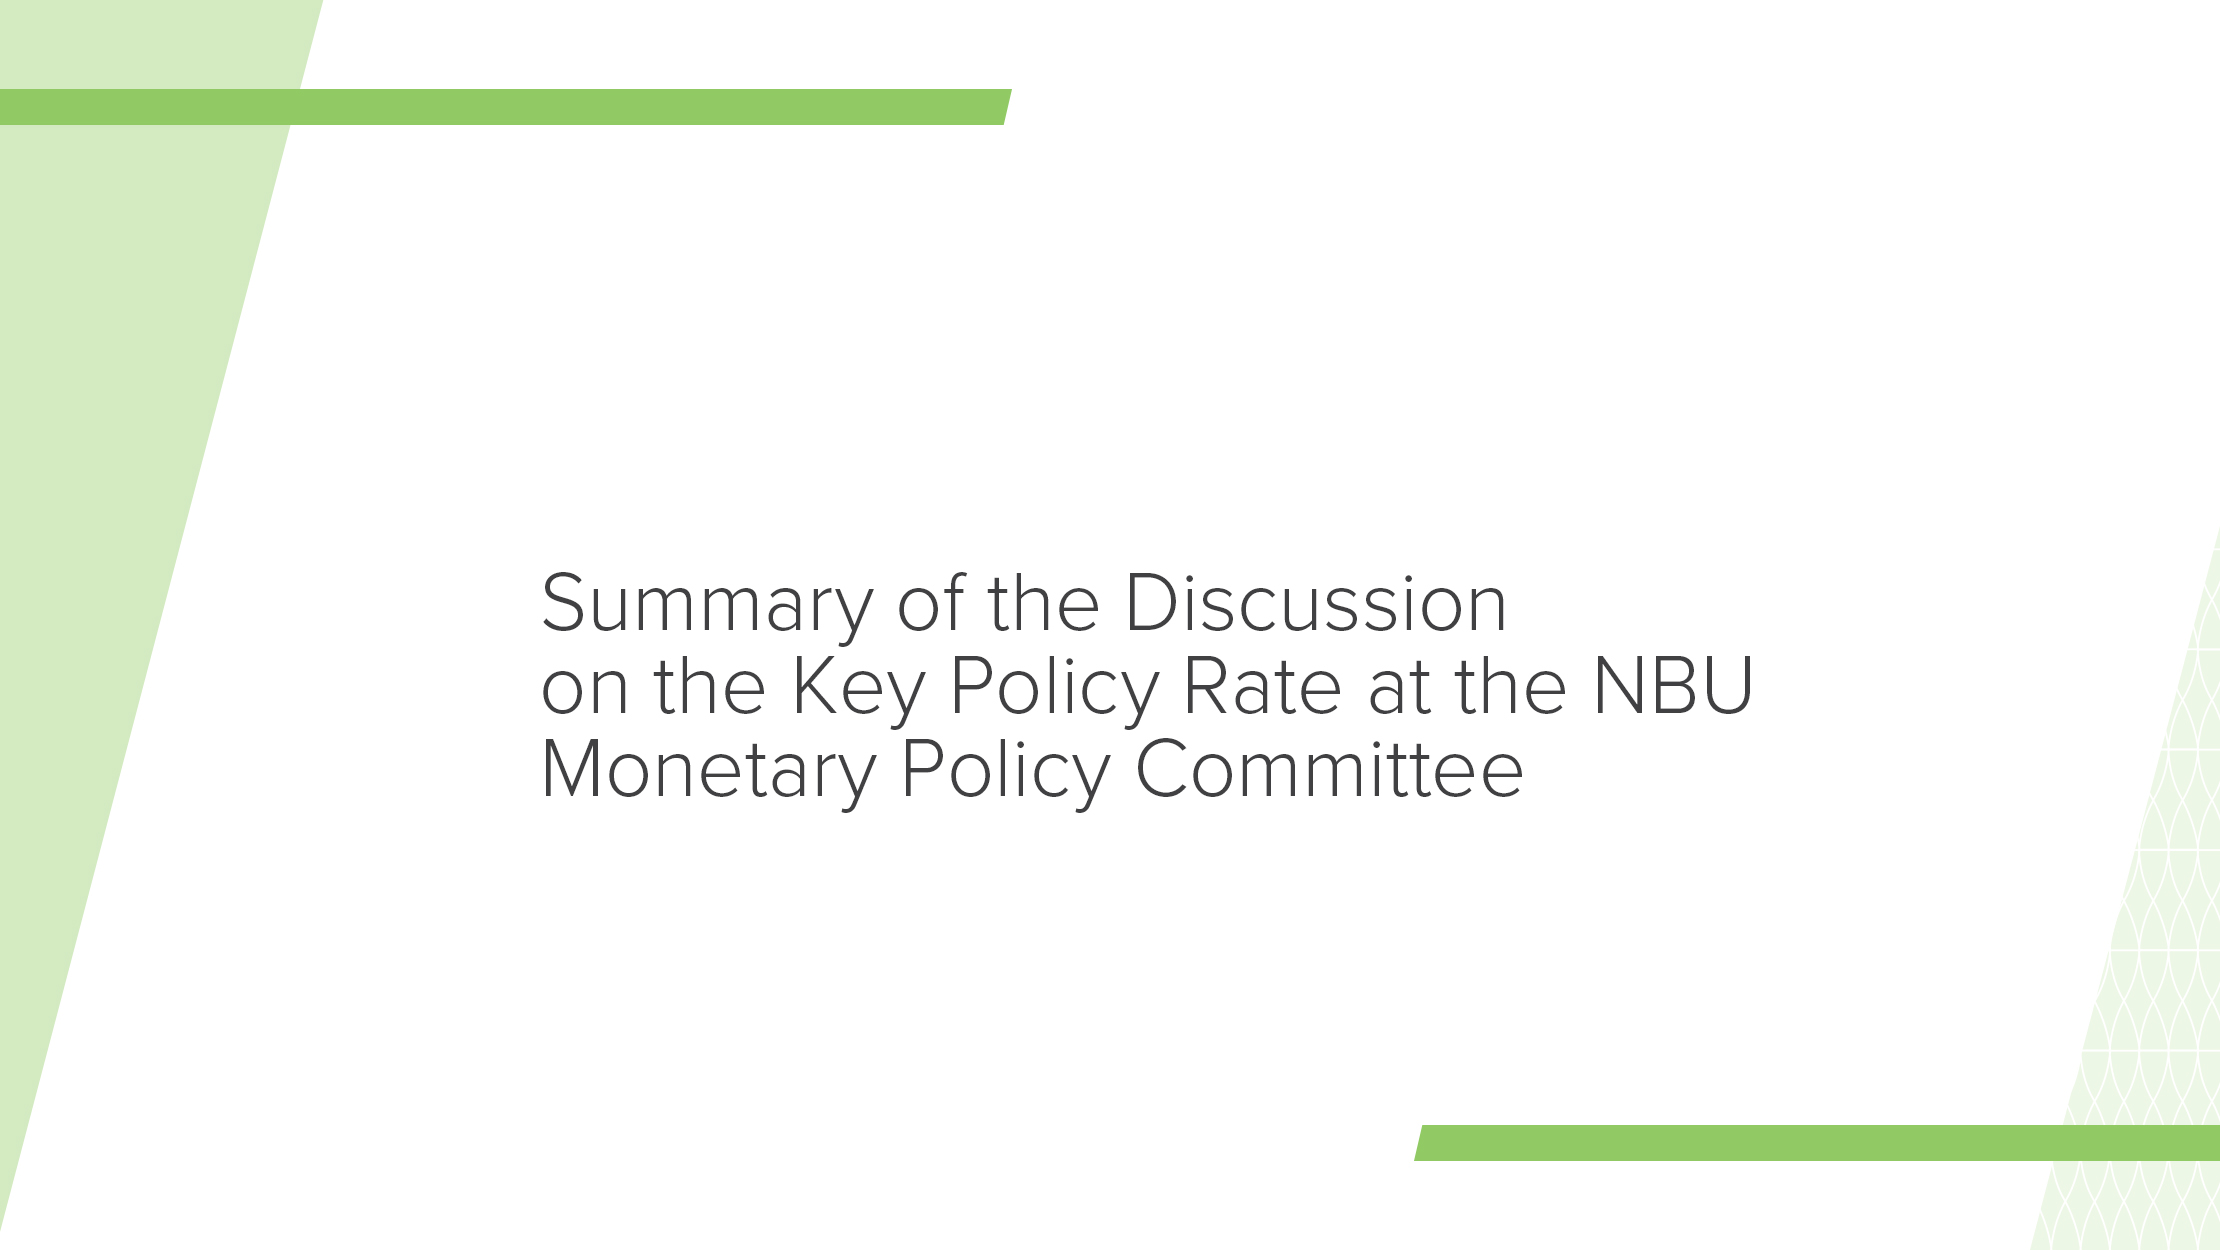 Summary of Key Policy Rate Discussion by NBU Monetary Policy Committee on 15 March 2023